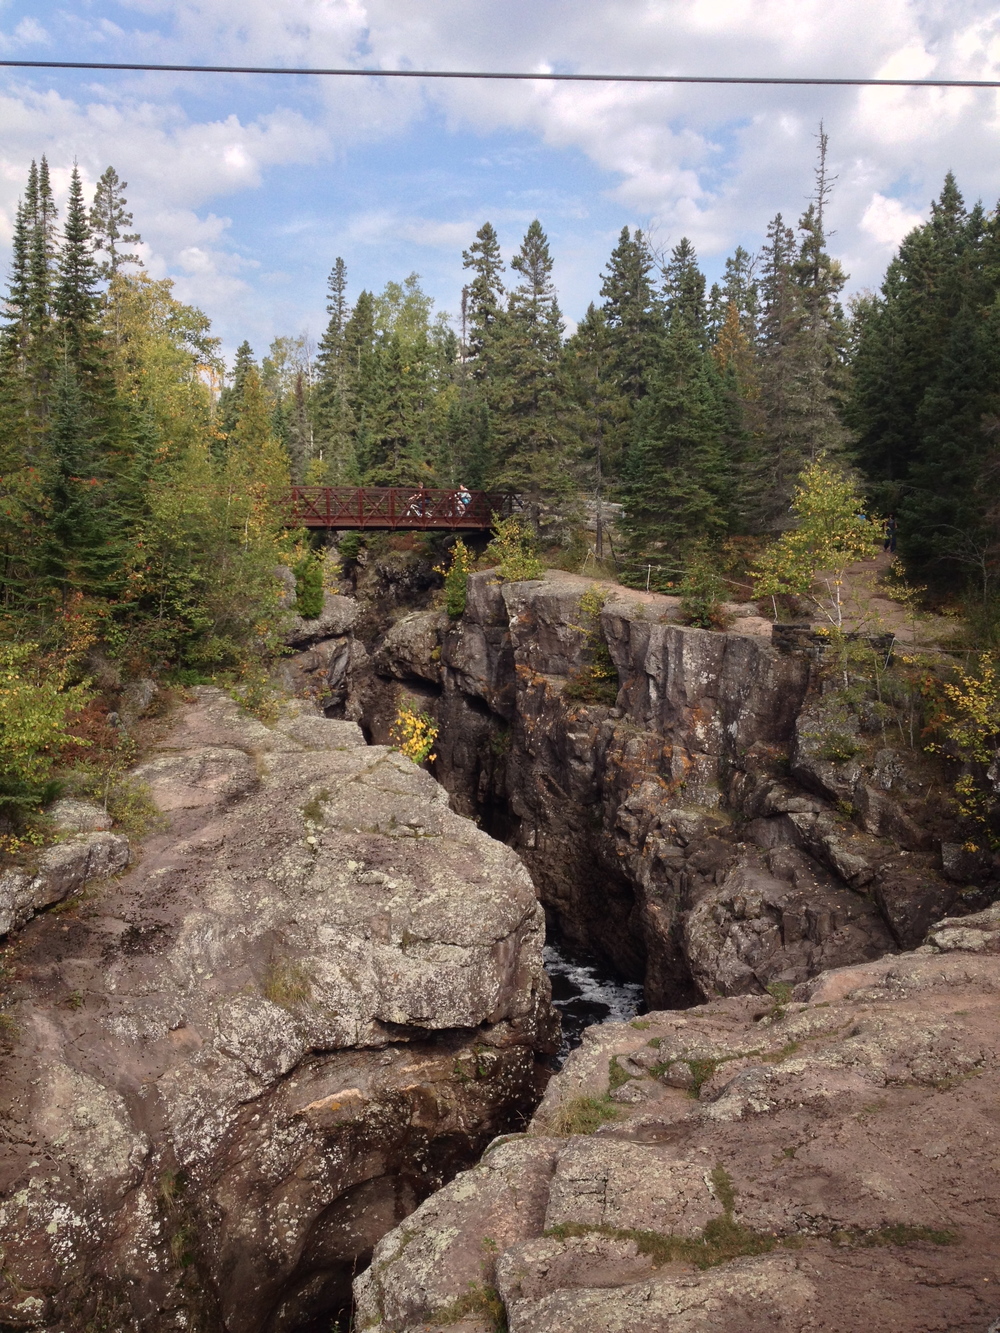 The gorge at Temperance River State Park